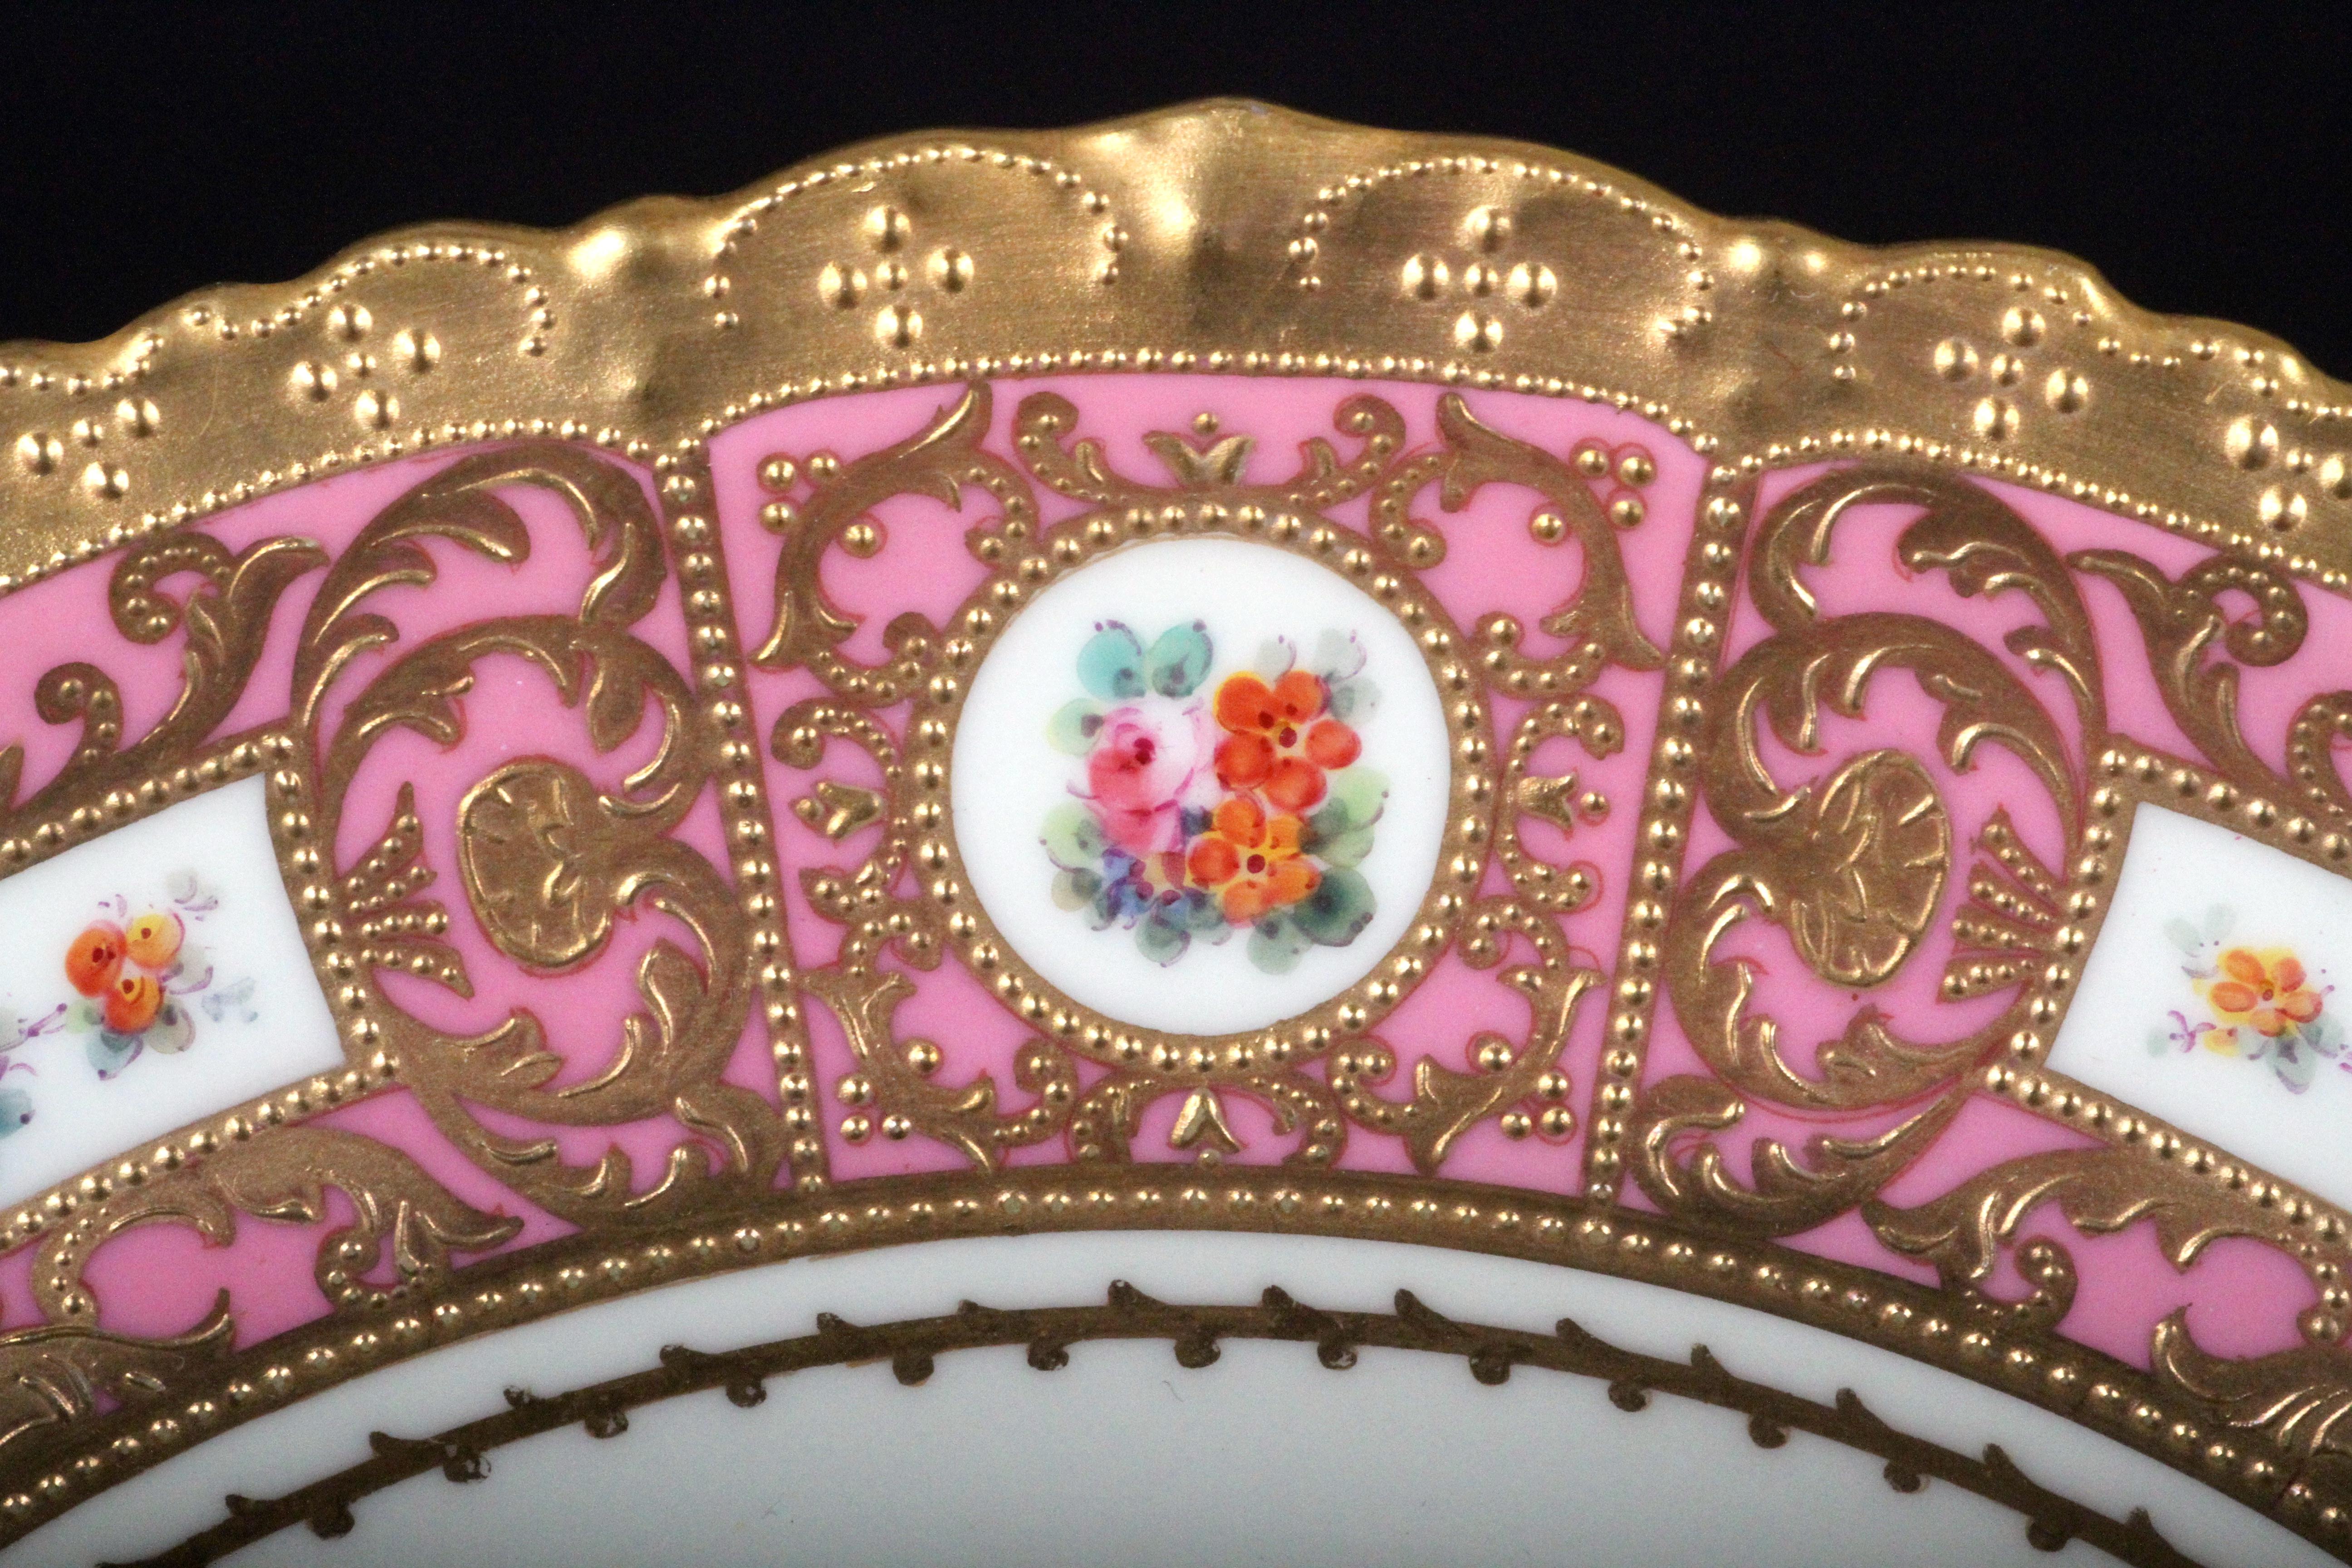 11 Derby for Tiffany Hand Painted and Gilded Pink Service Plates (Spätes 19. Jahrhundert) im Angebot